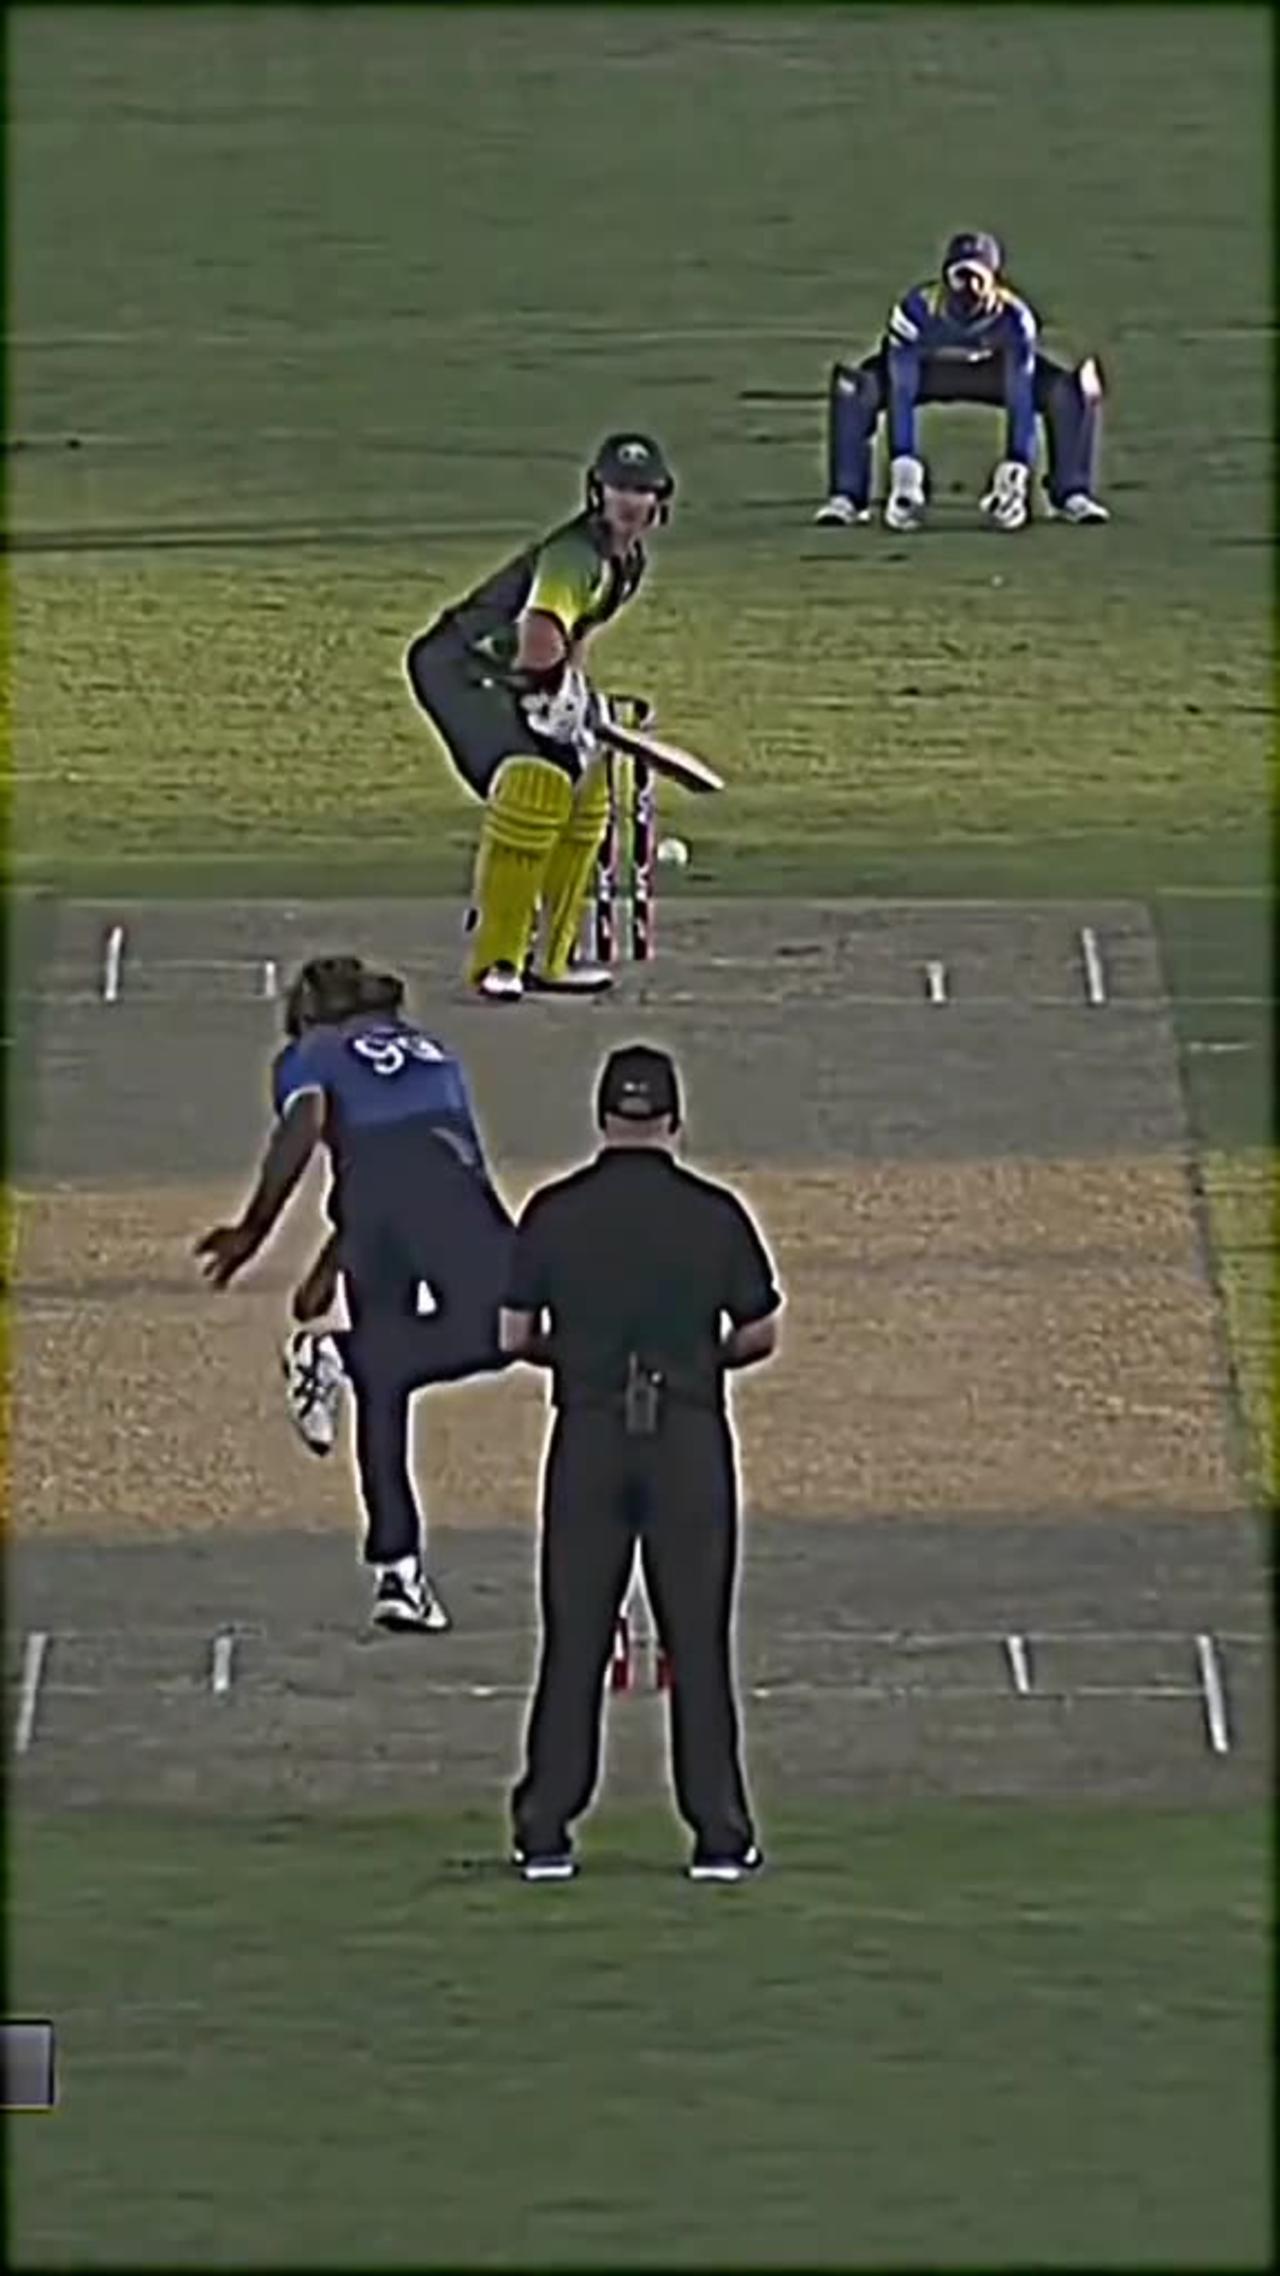 Lasith Malinga's Masterclass: A Collection of Spectacular Wickets